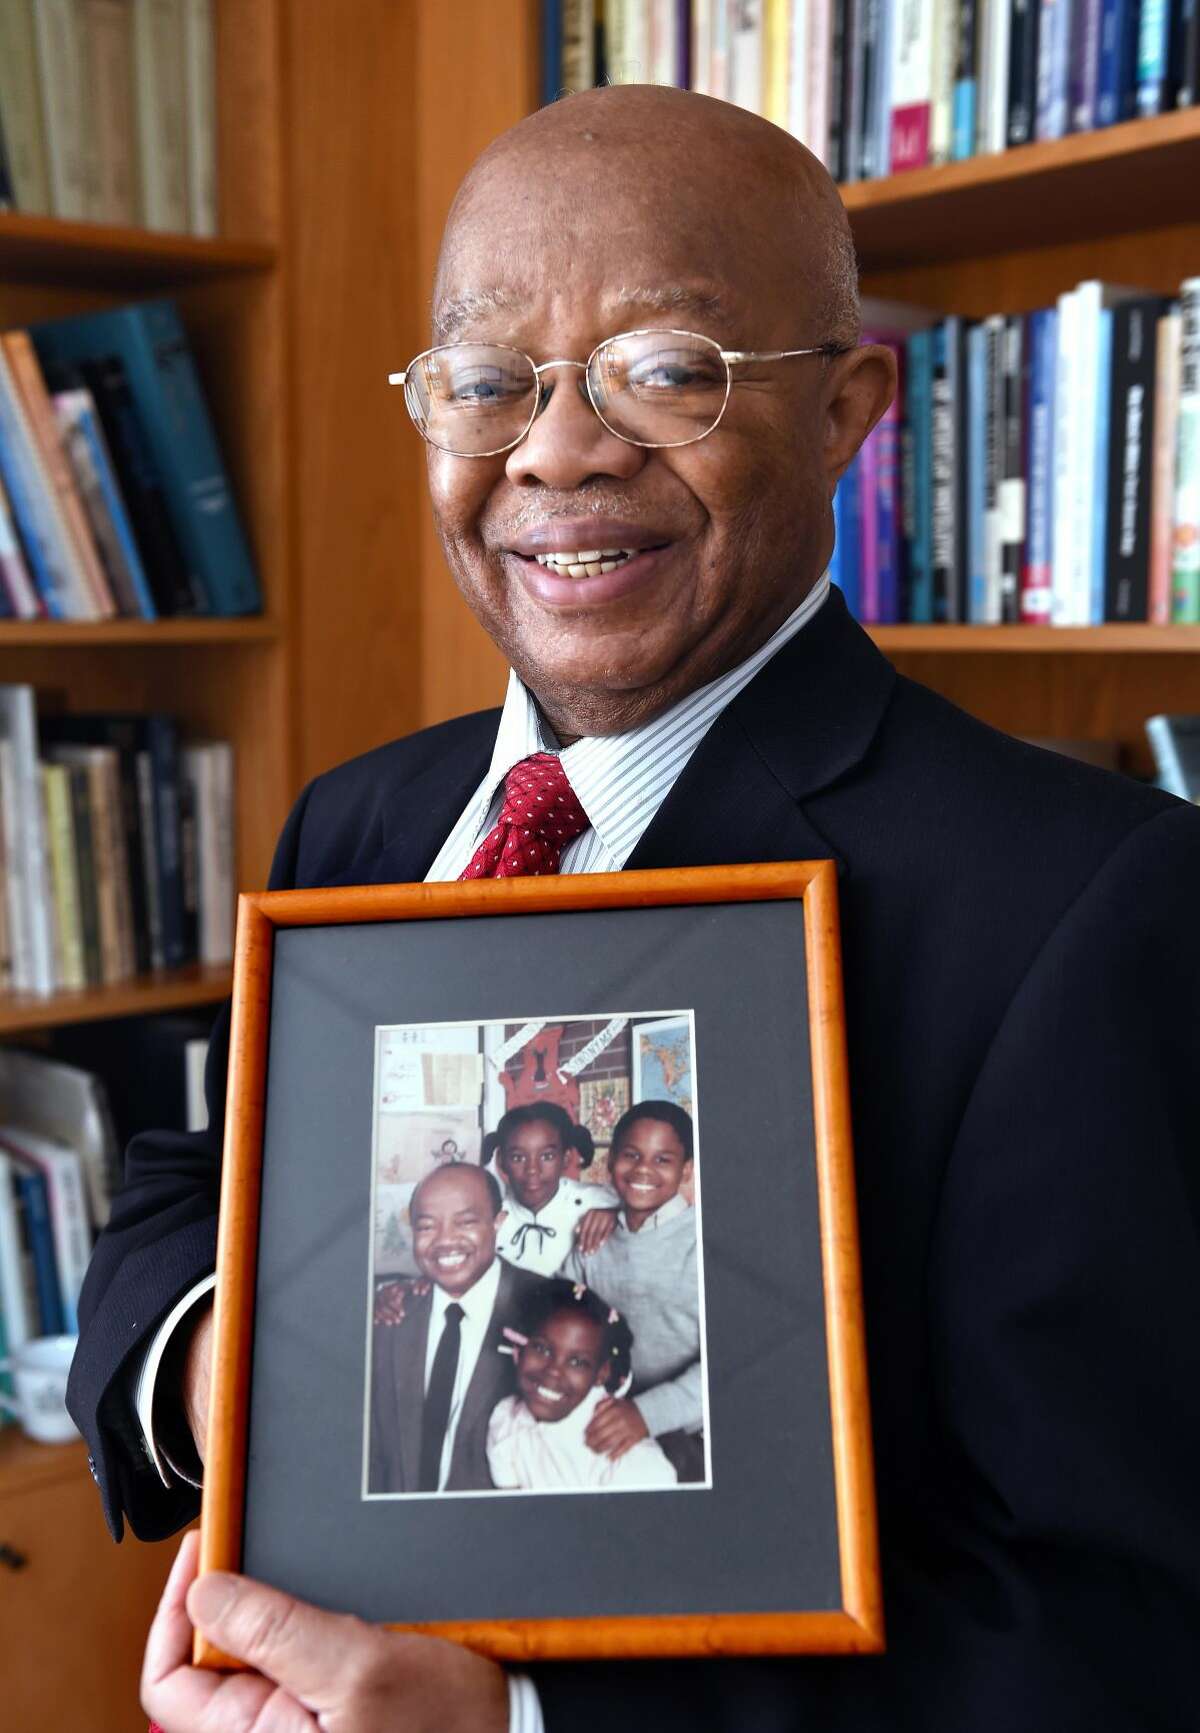 Dr. James Comer of the Yale Child Study Center is photographed on Oct. 29 holding an old picture taken with students at the former Martin Luther King Jr. Elementary School in New Haven.